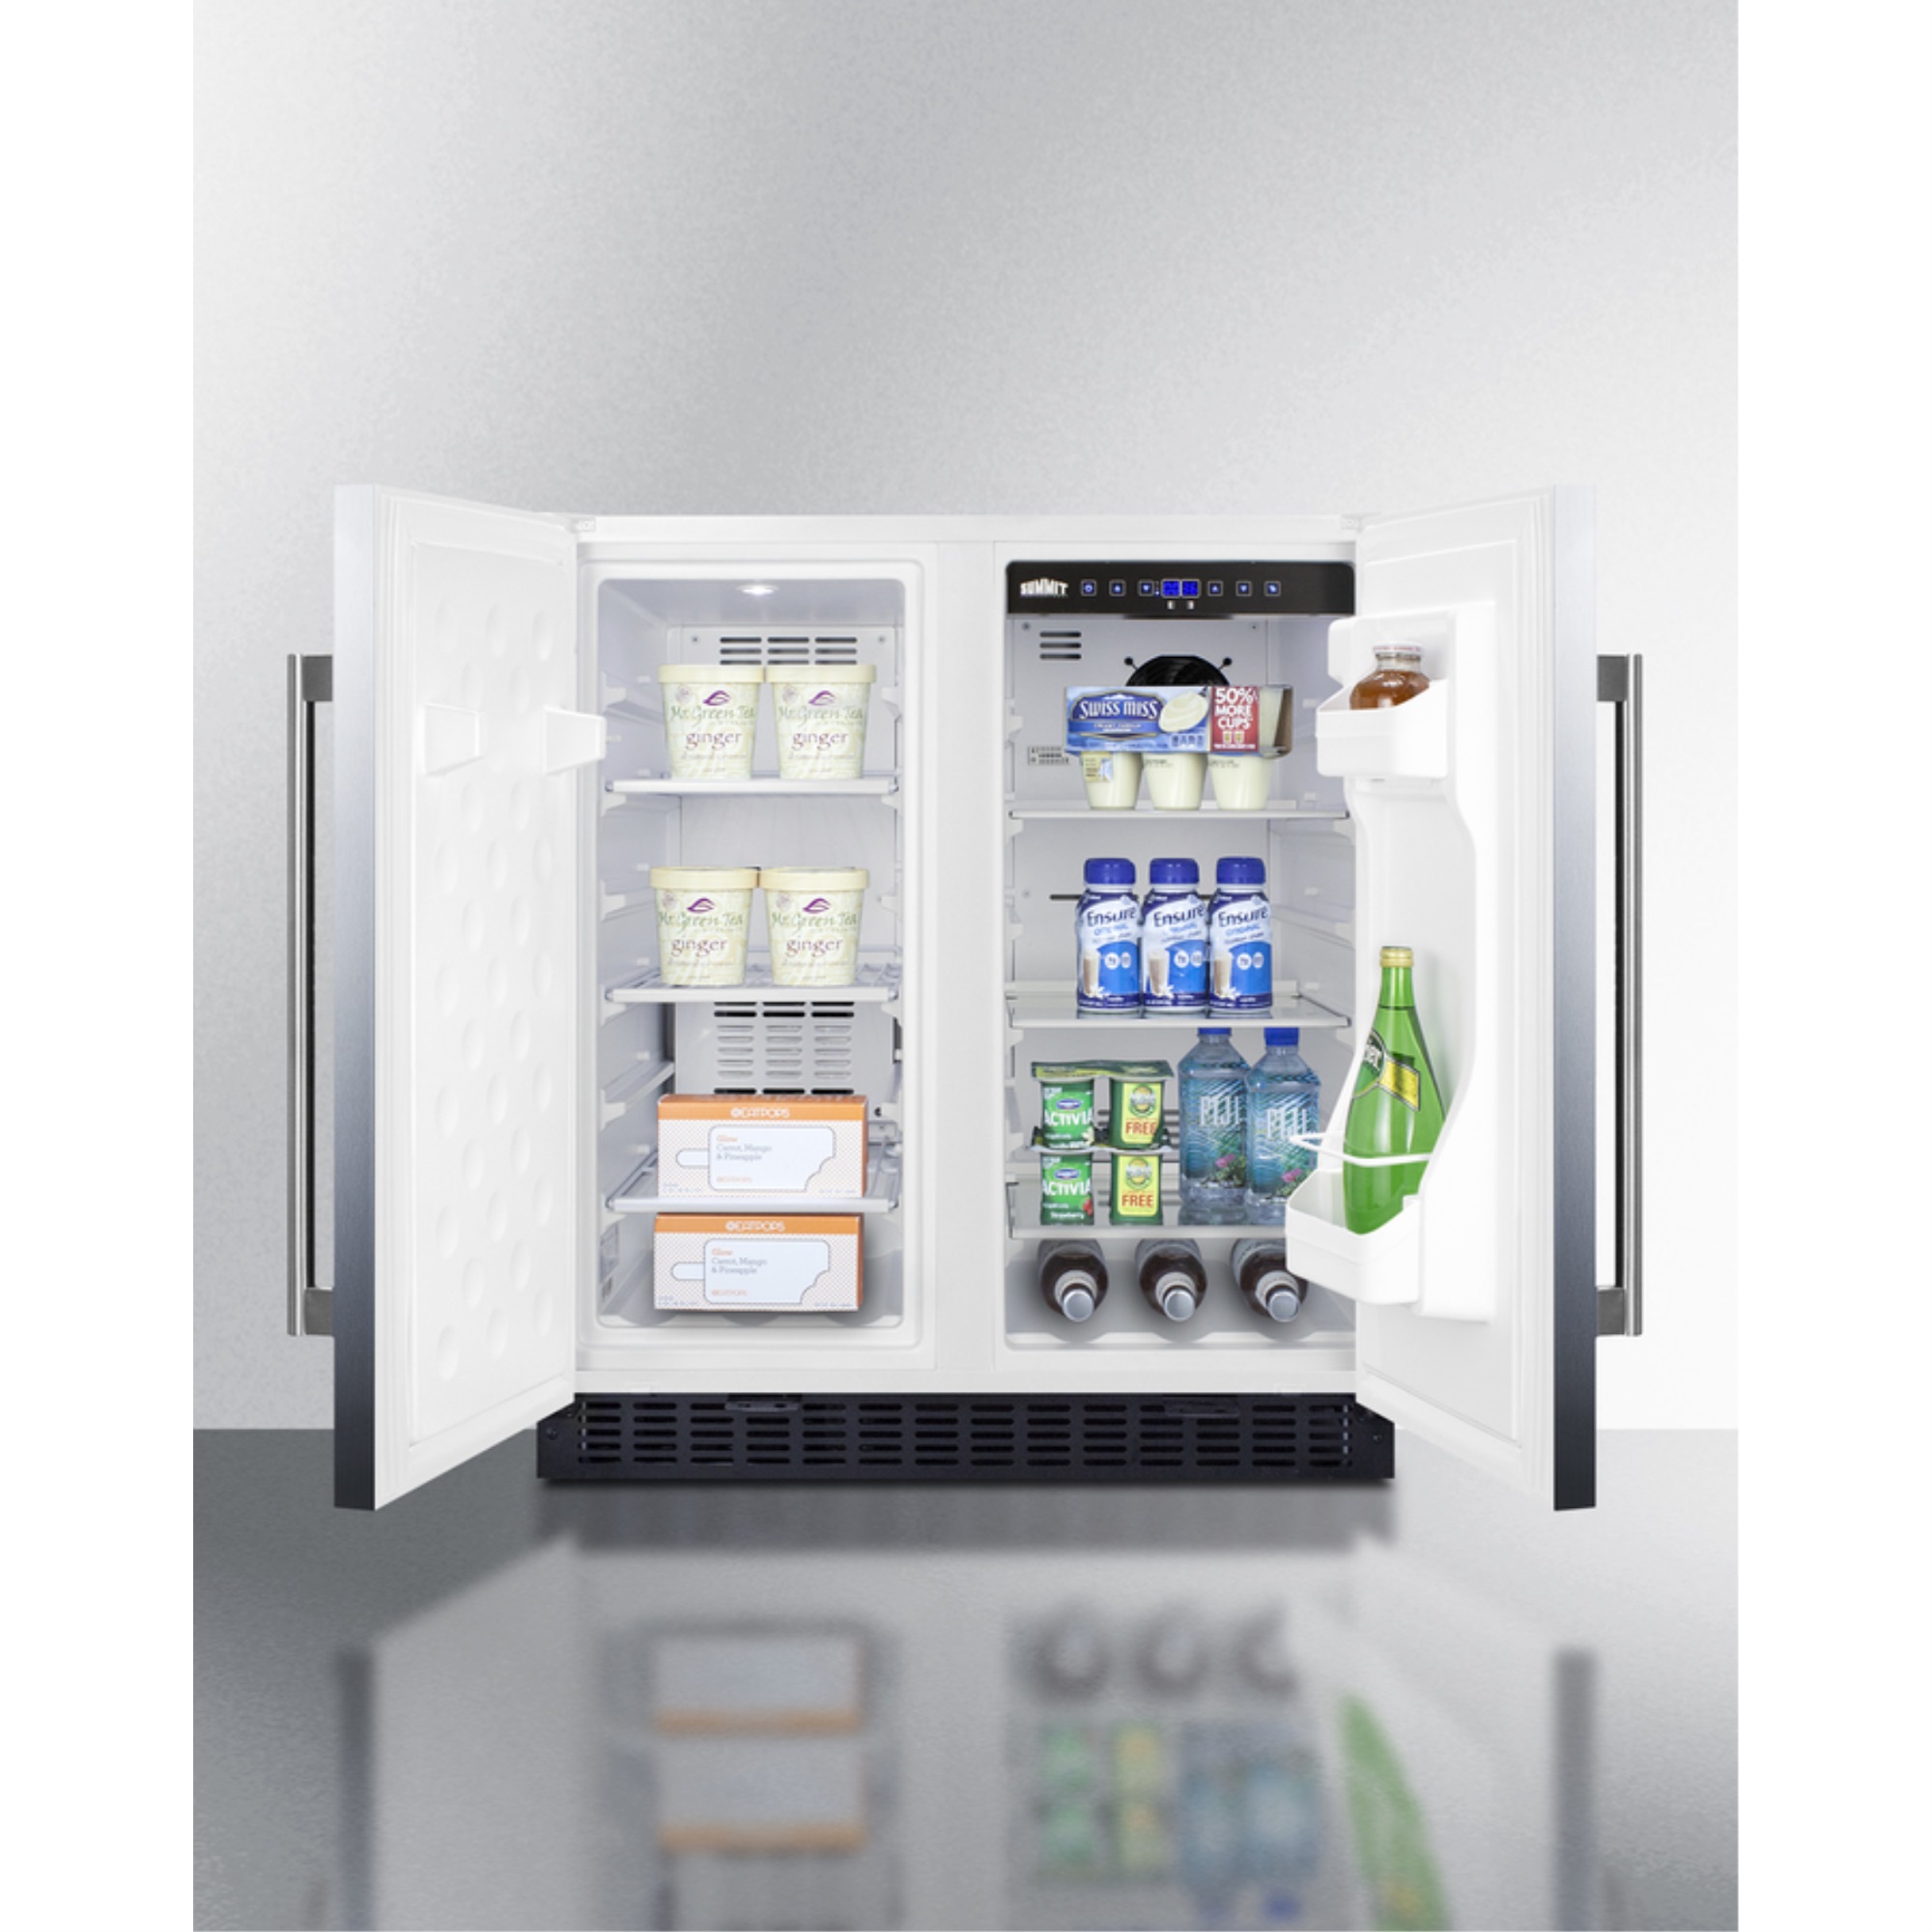 30" wide undercounter frost-free side-by-side refrigerator-freezer with stainless steel doors, white cabinet, locks, stainless steel handles, and digital controls - image 5 of 5